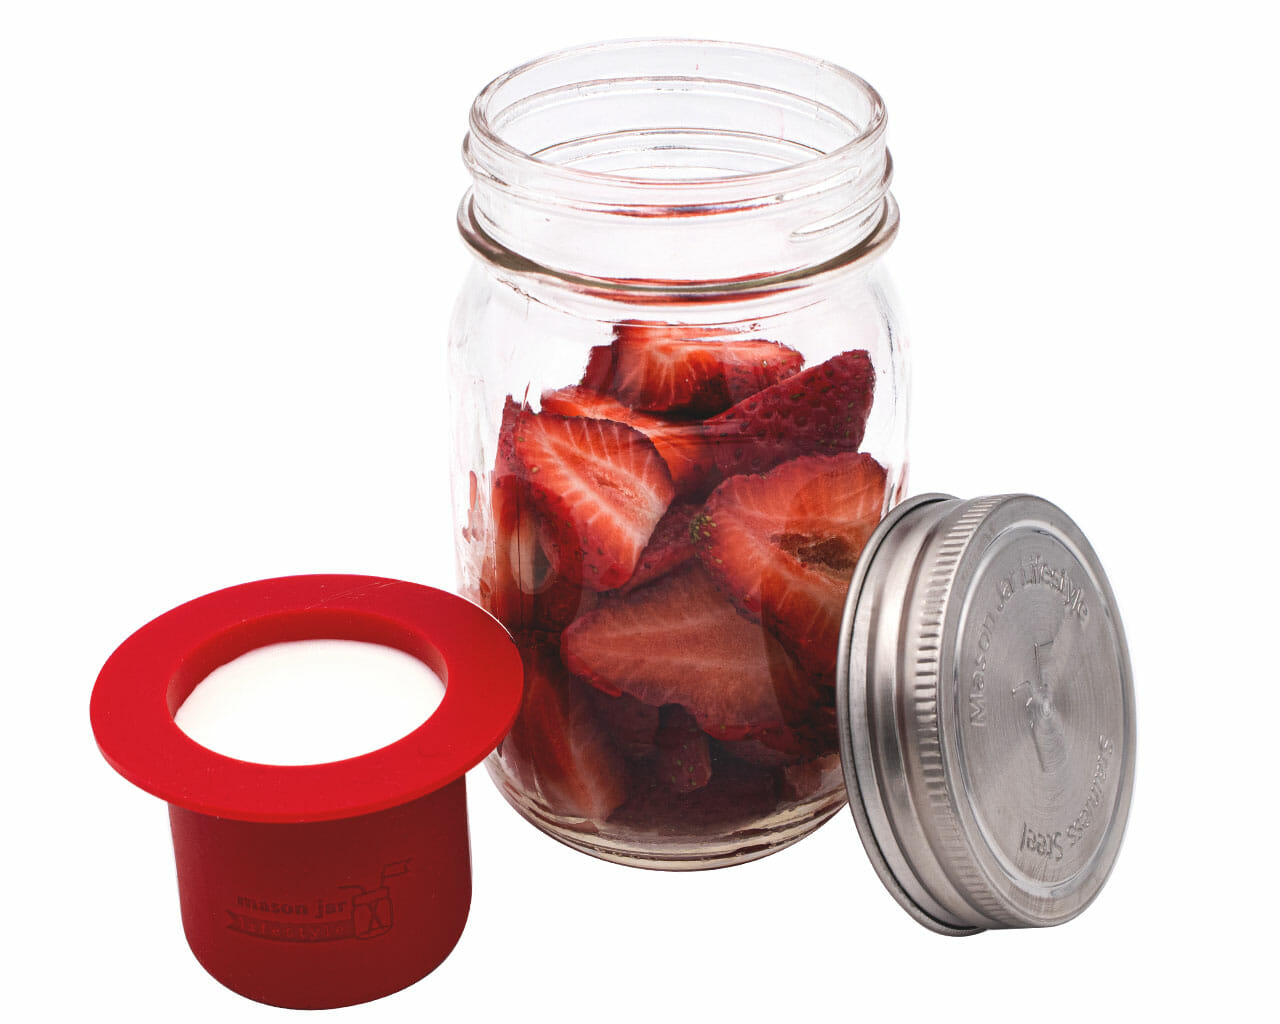 Stainless steel food jars and containers make on the go snacking